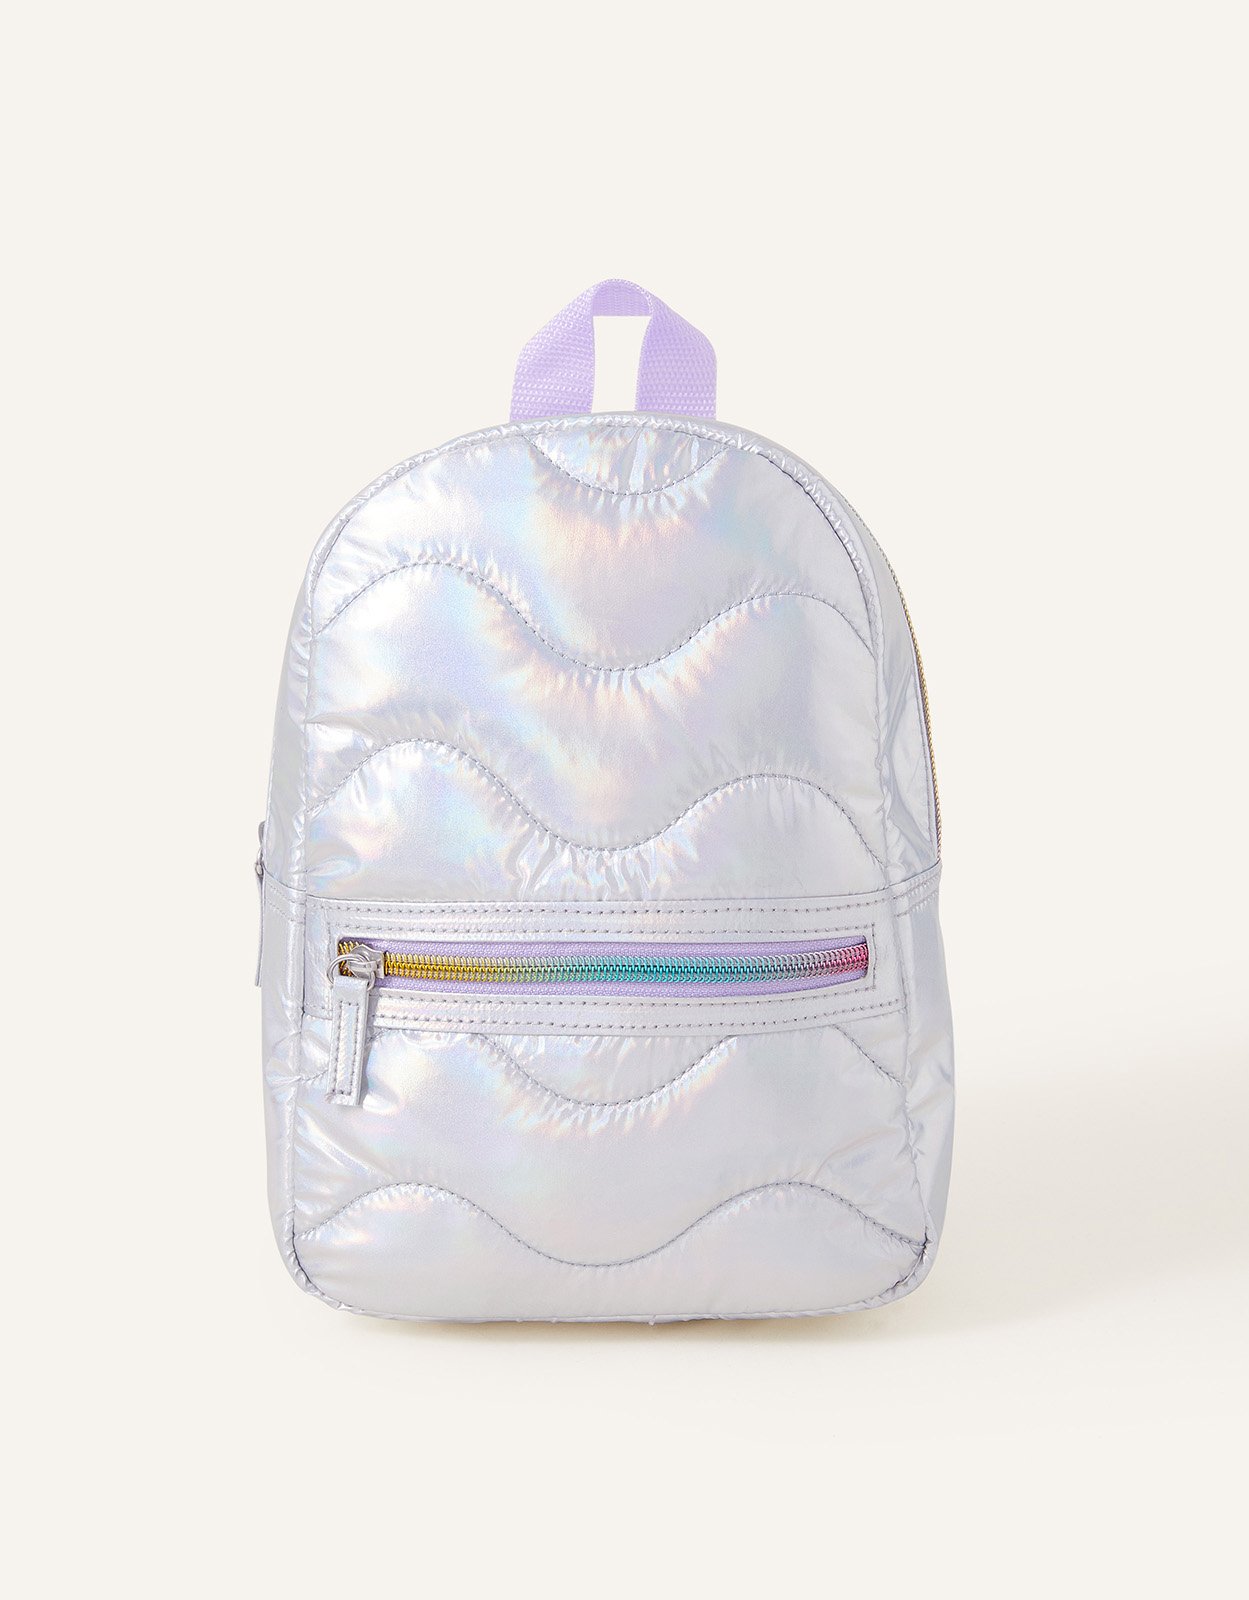 Accessorize Girls Silver Rainbow Iridescent Backpack, Size: 1x26cm